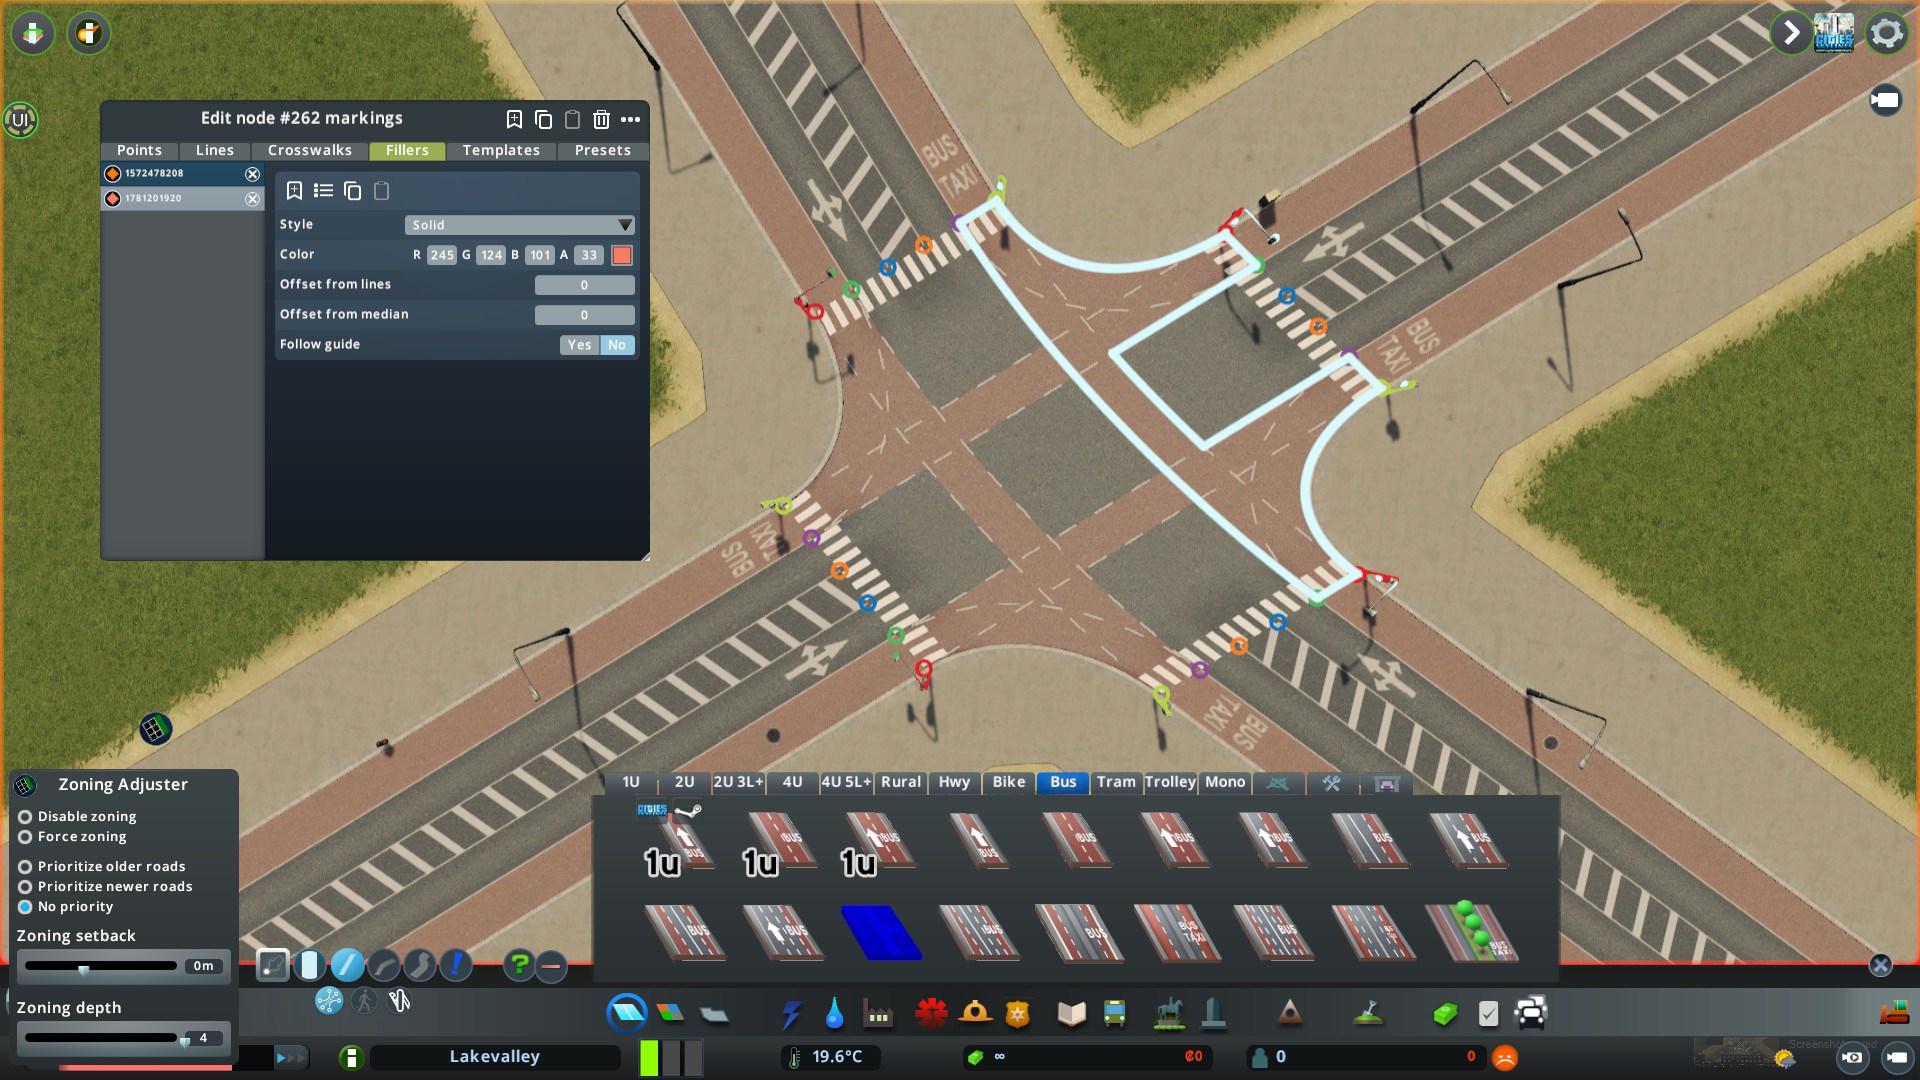 Cities: Skylines Official Guide for IMT with Vanilla + Roads - How to make them pretty - FBB6406